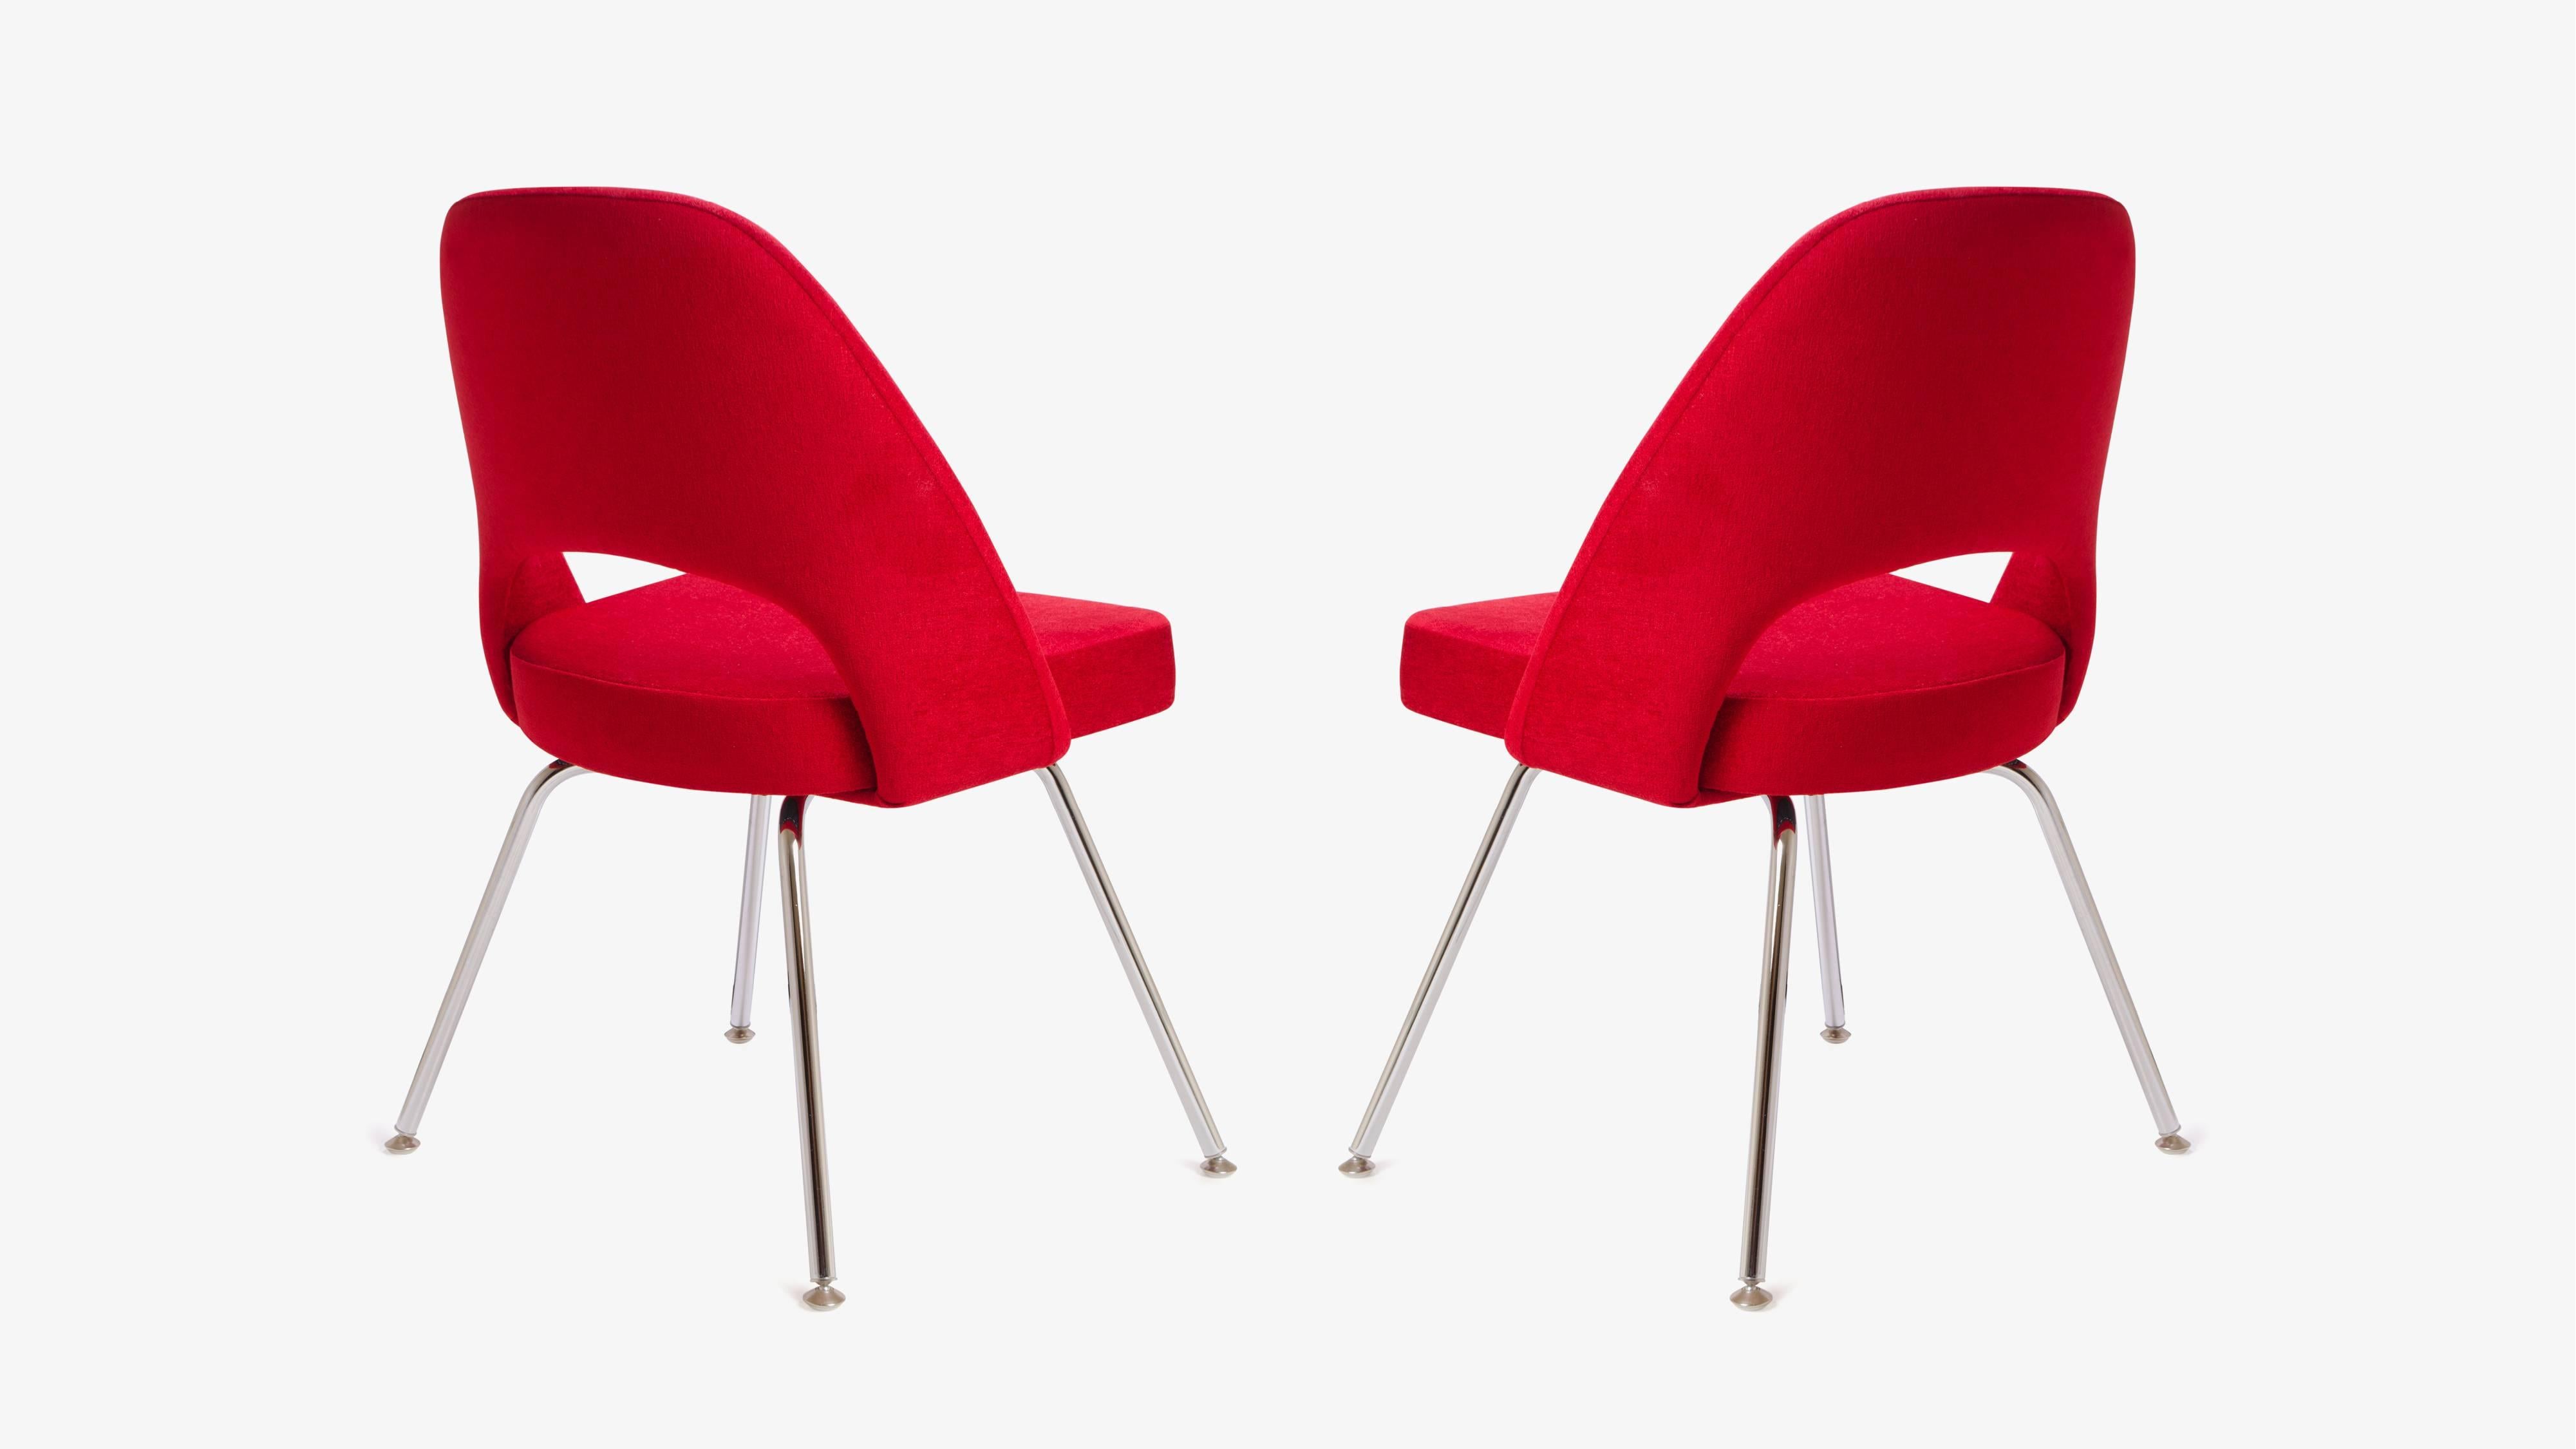 American Saarinen for Knoll Executive Armless Chairs in Original Knoll Fire-Red, Pair